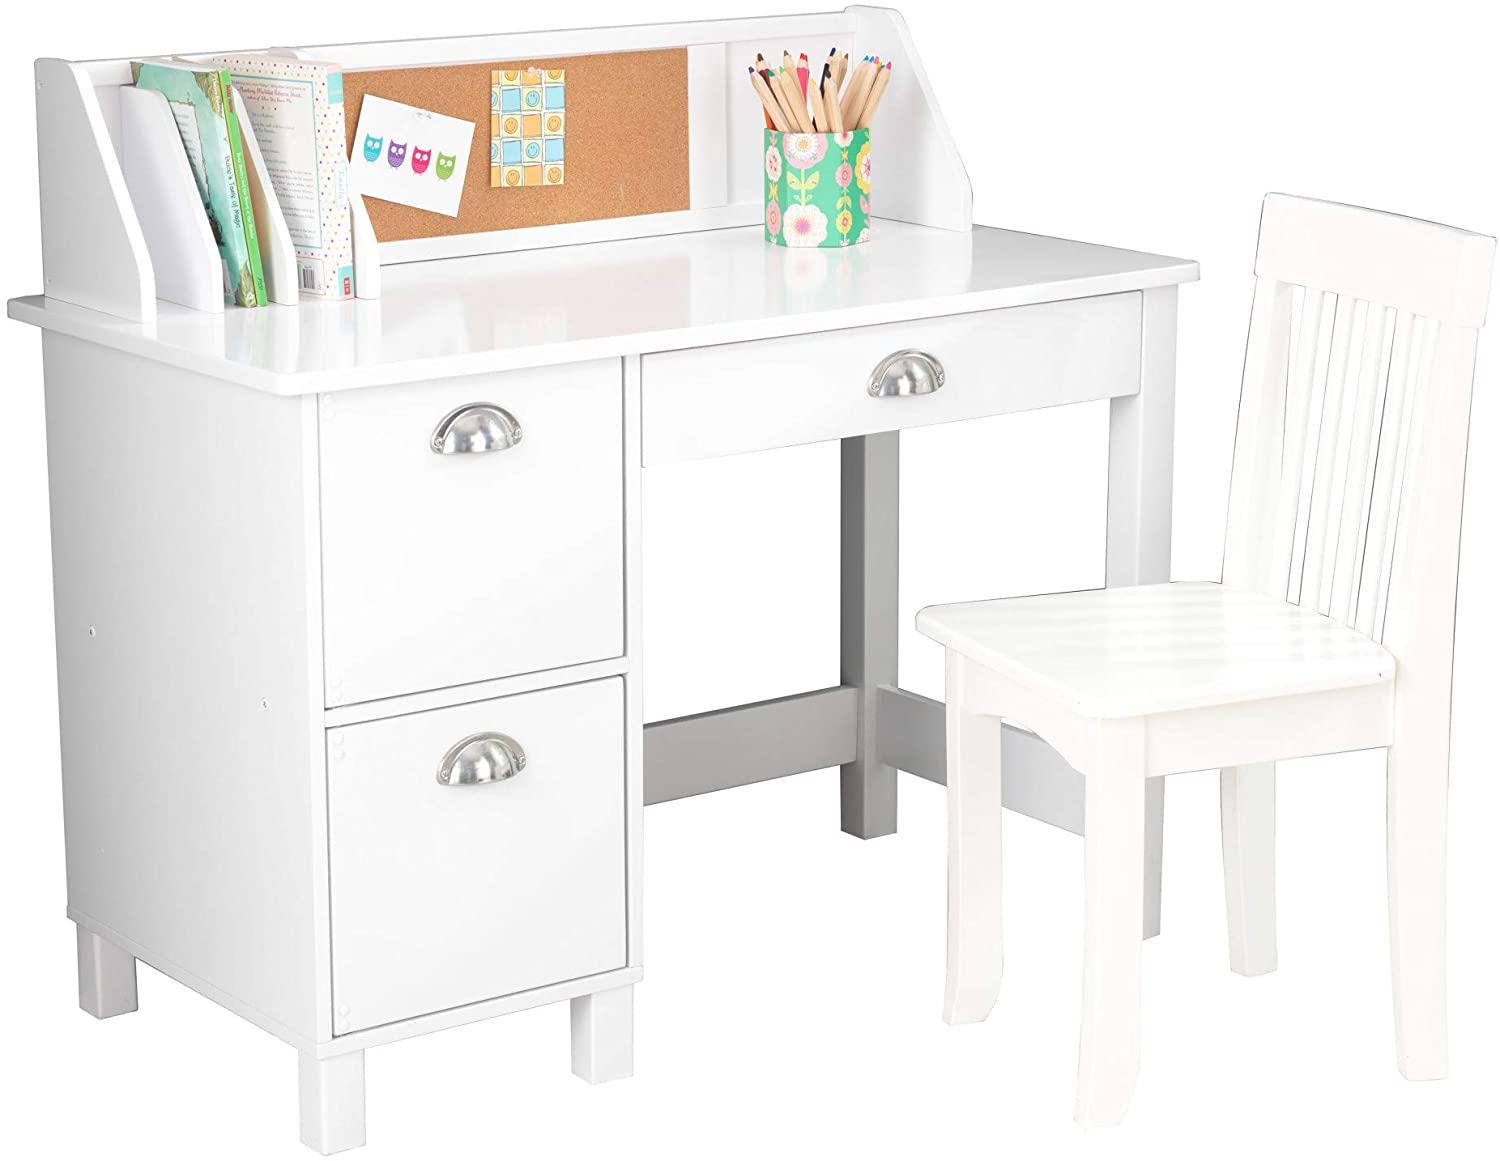 KidKraft Wooden Study Desk for Children with Chair for $124.99 Shipped